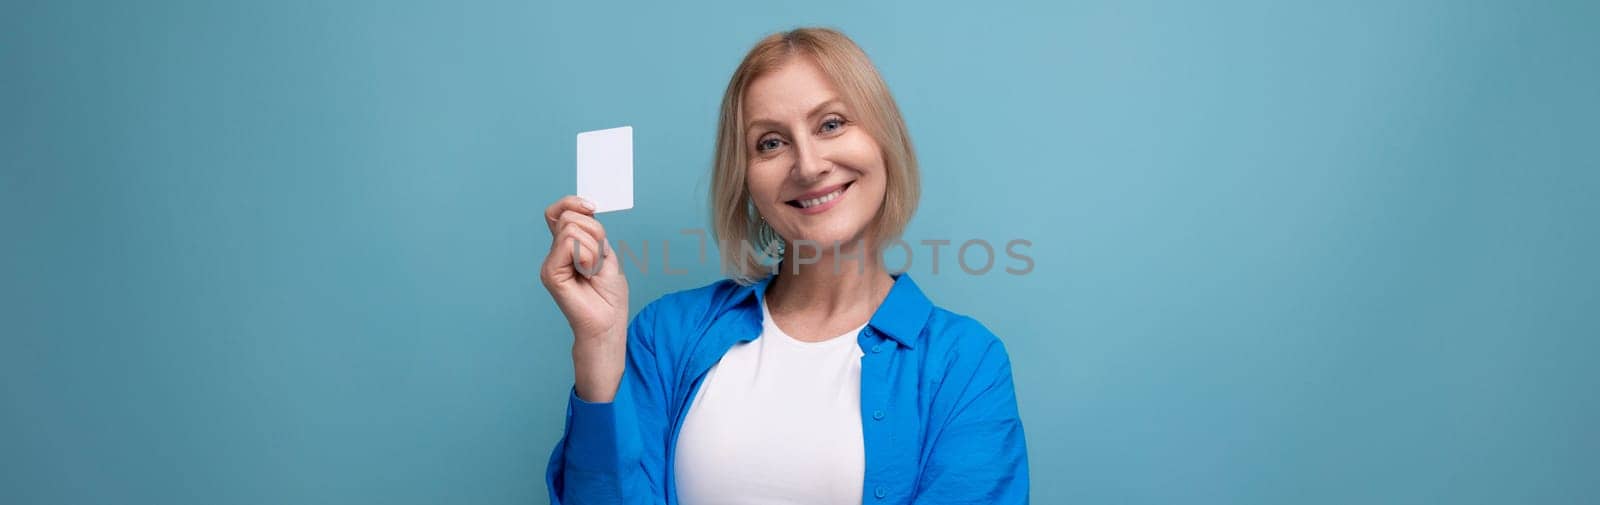 blonde middle-aged woman with a bob haircut holding a credit card on a studio background.